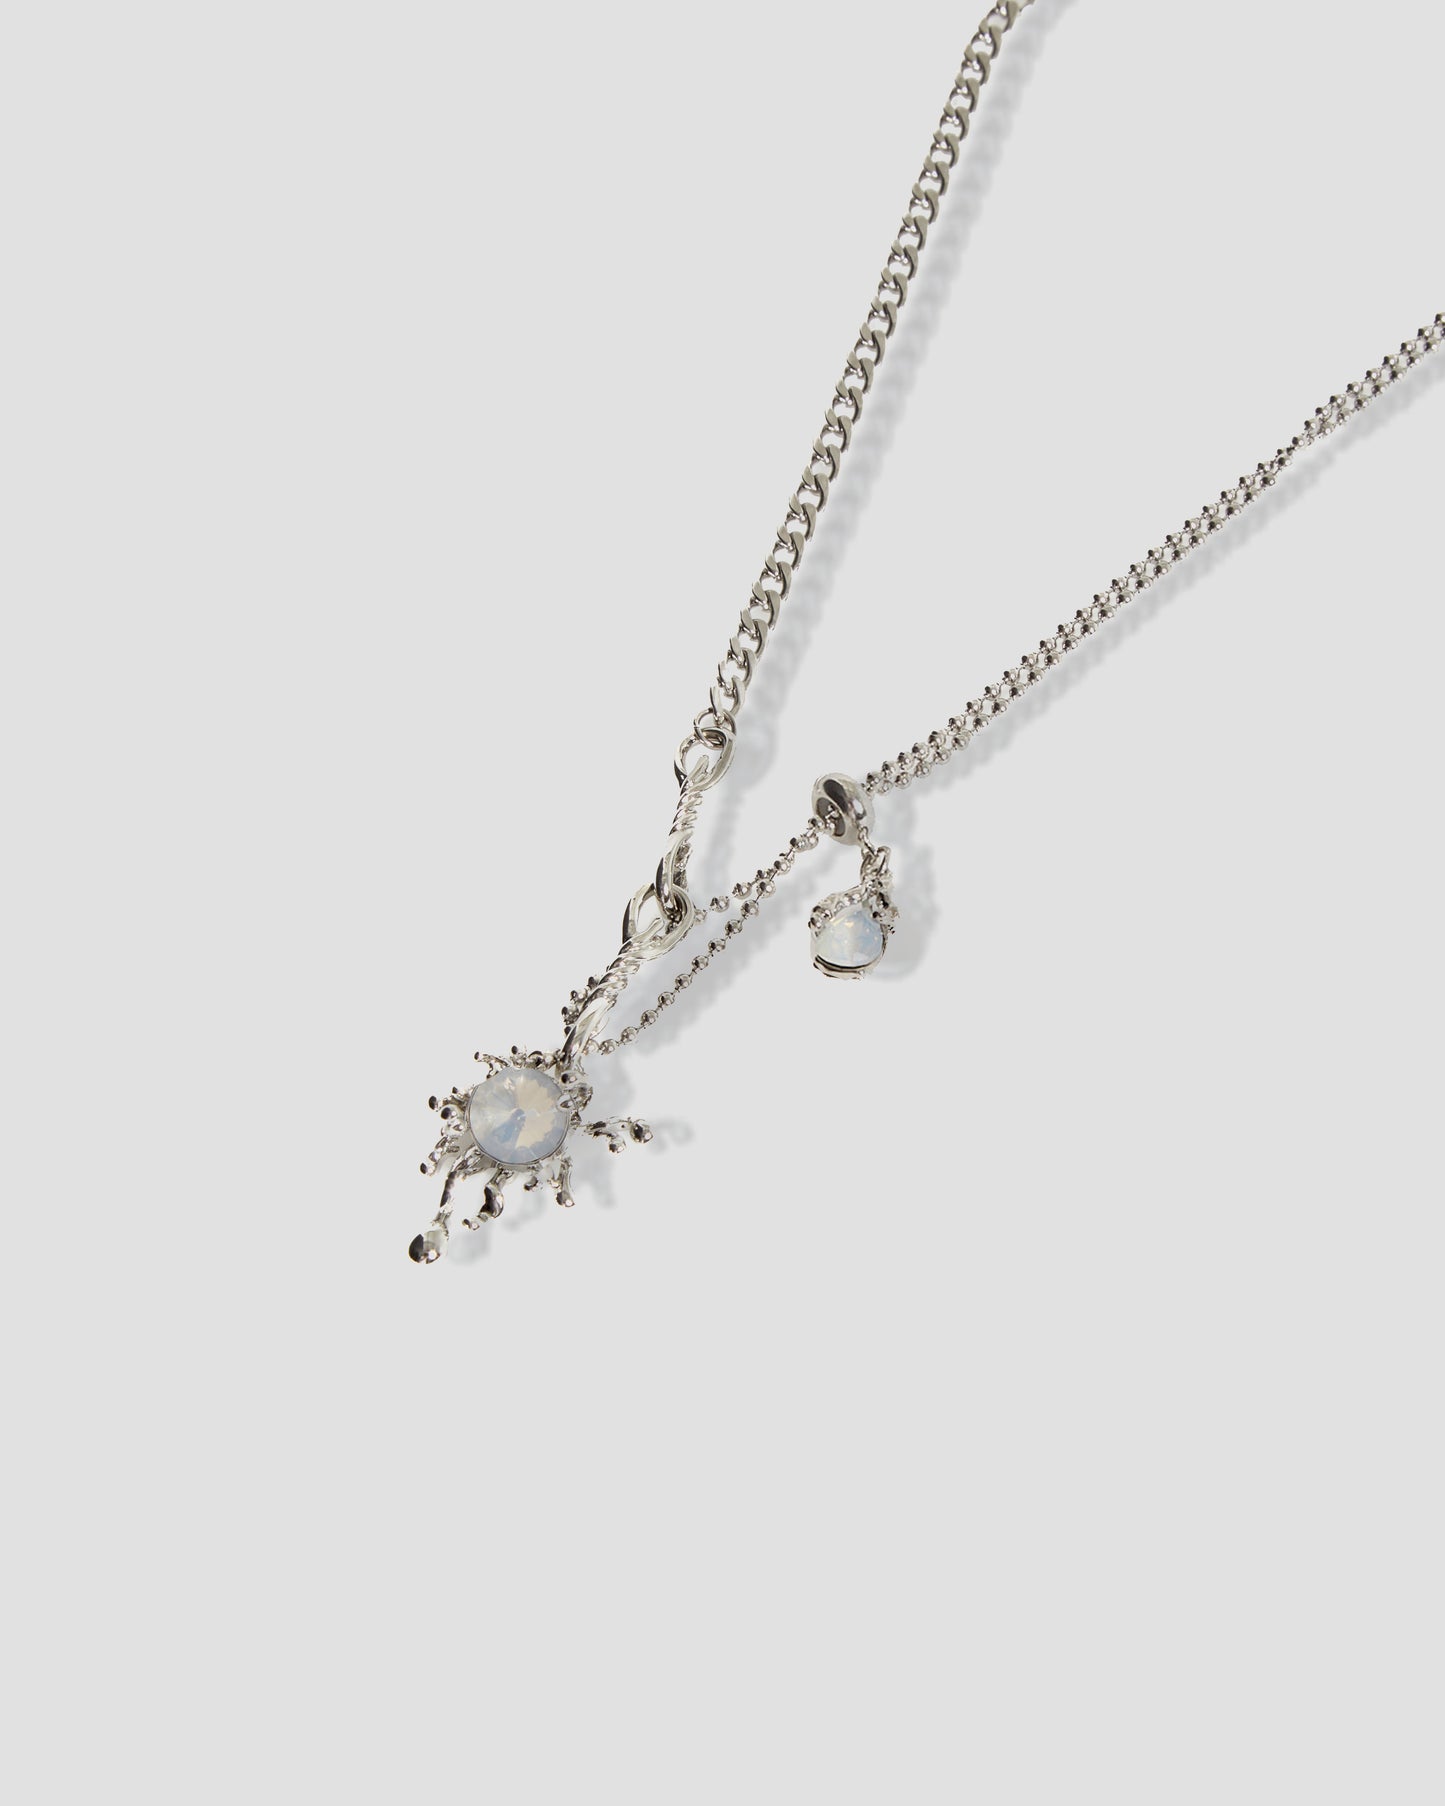 Recoil Ball Chain Necklace With Moonstone Charms in Silver